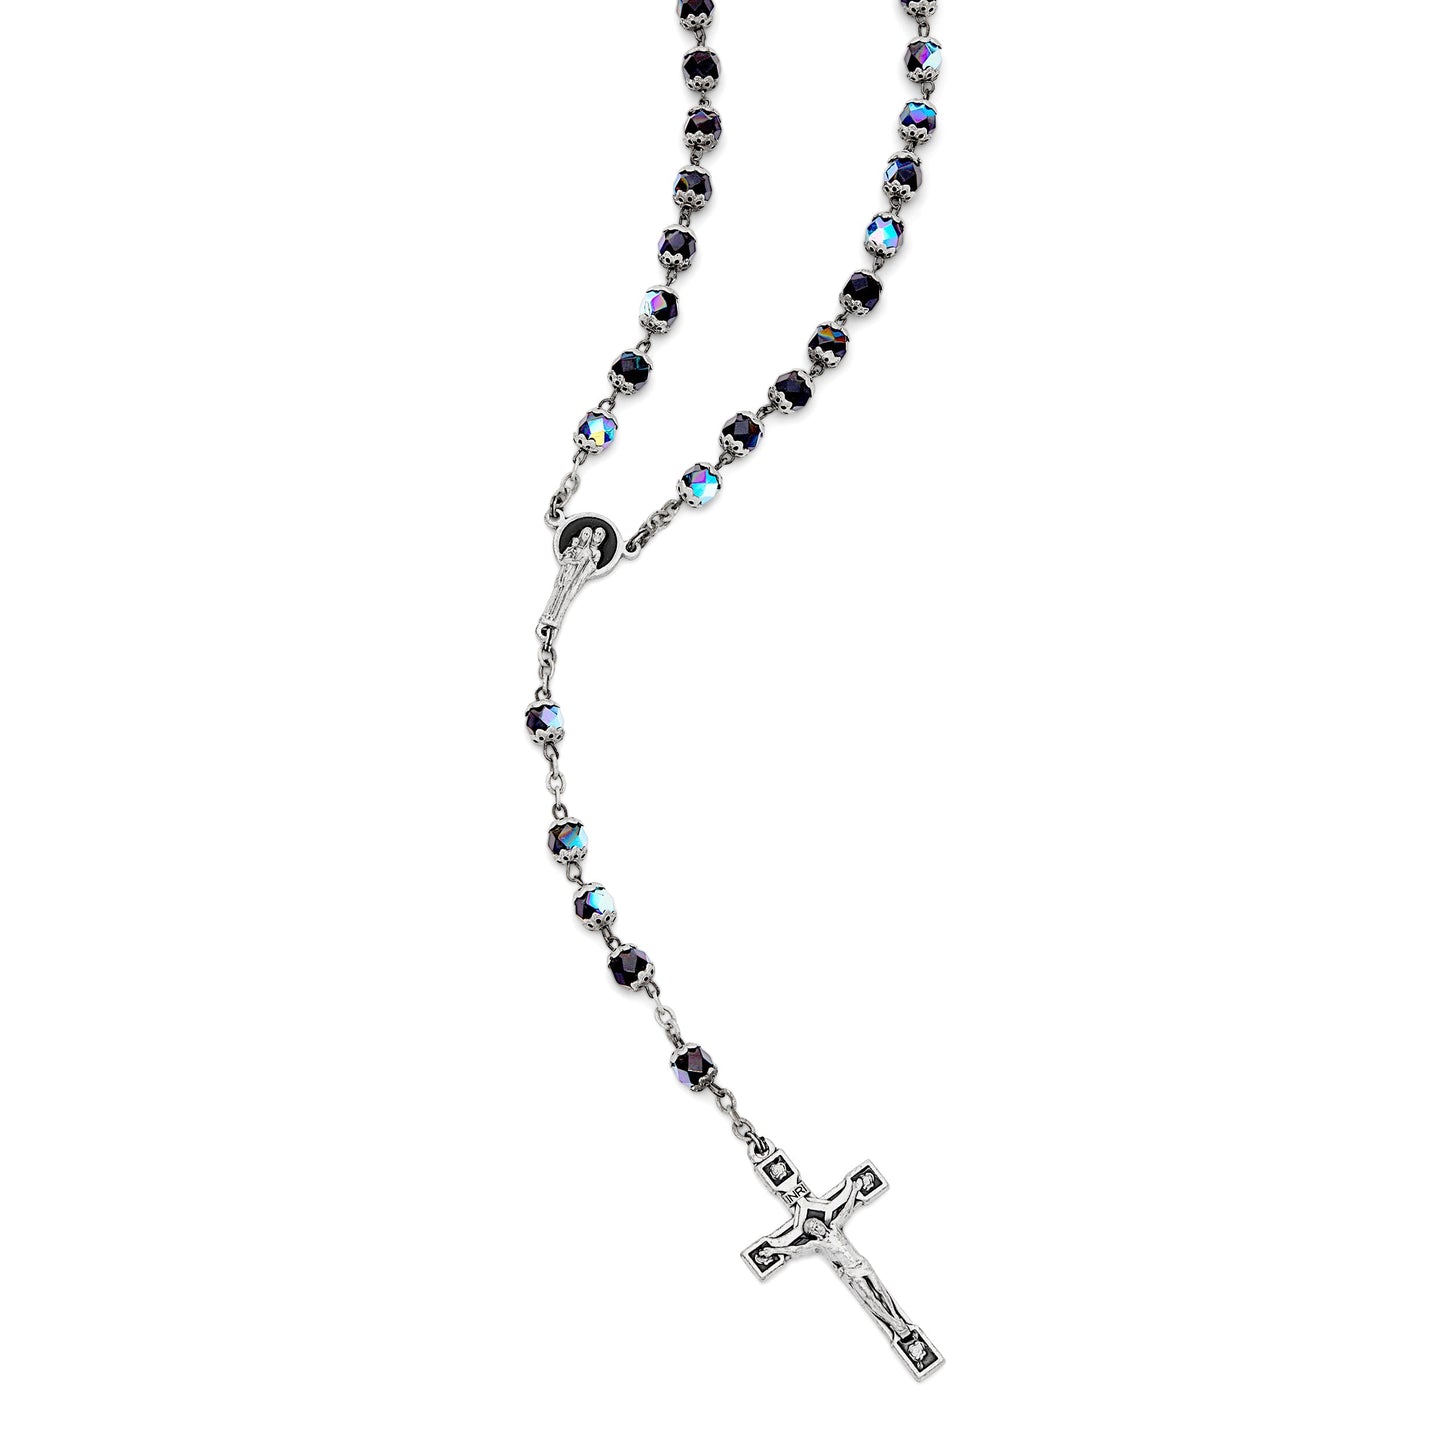 MONDO CATTOLICO Prayer Beads Holy Family Rosary in Black Faceted Crystal Beads